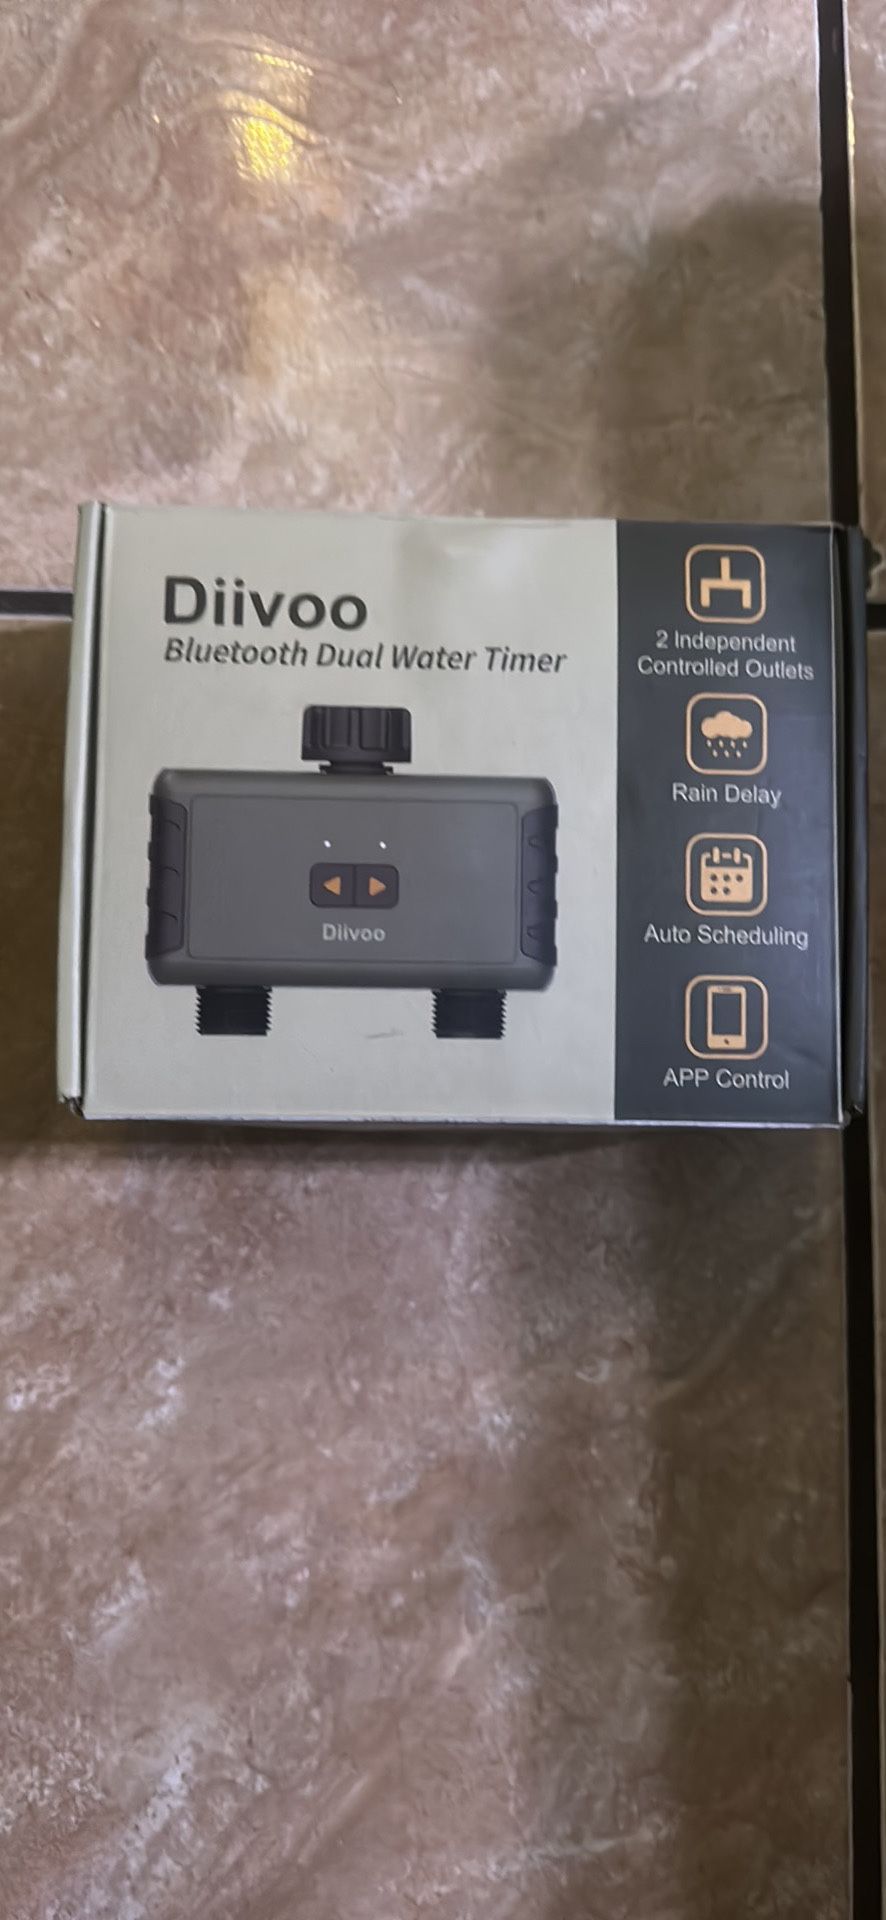 Bluetooth Water Timer 2 Zone, Diivoo Smart Irrigation Sprinkler Timer Up to 40 Separate Programmable Schedules, Hose Timer with Rain Delay and Manual 